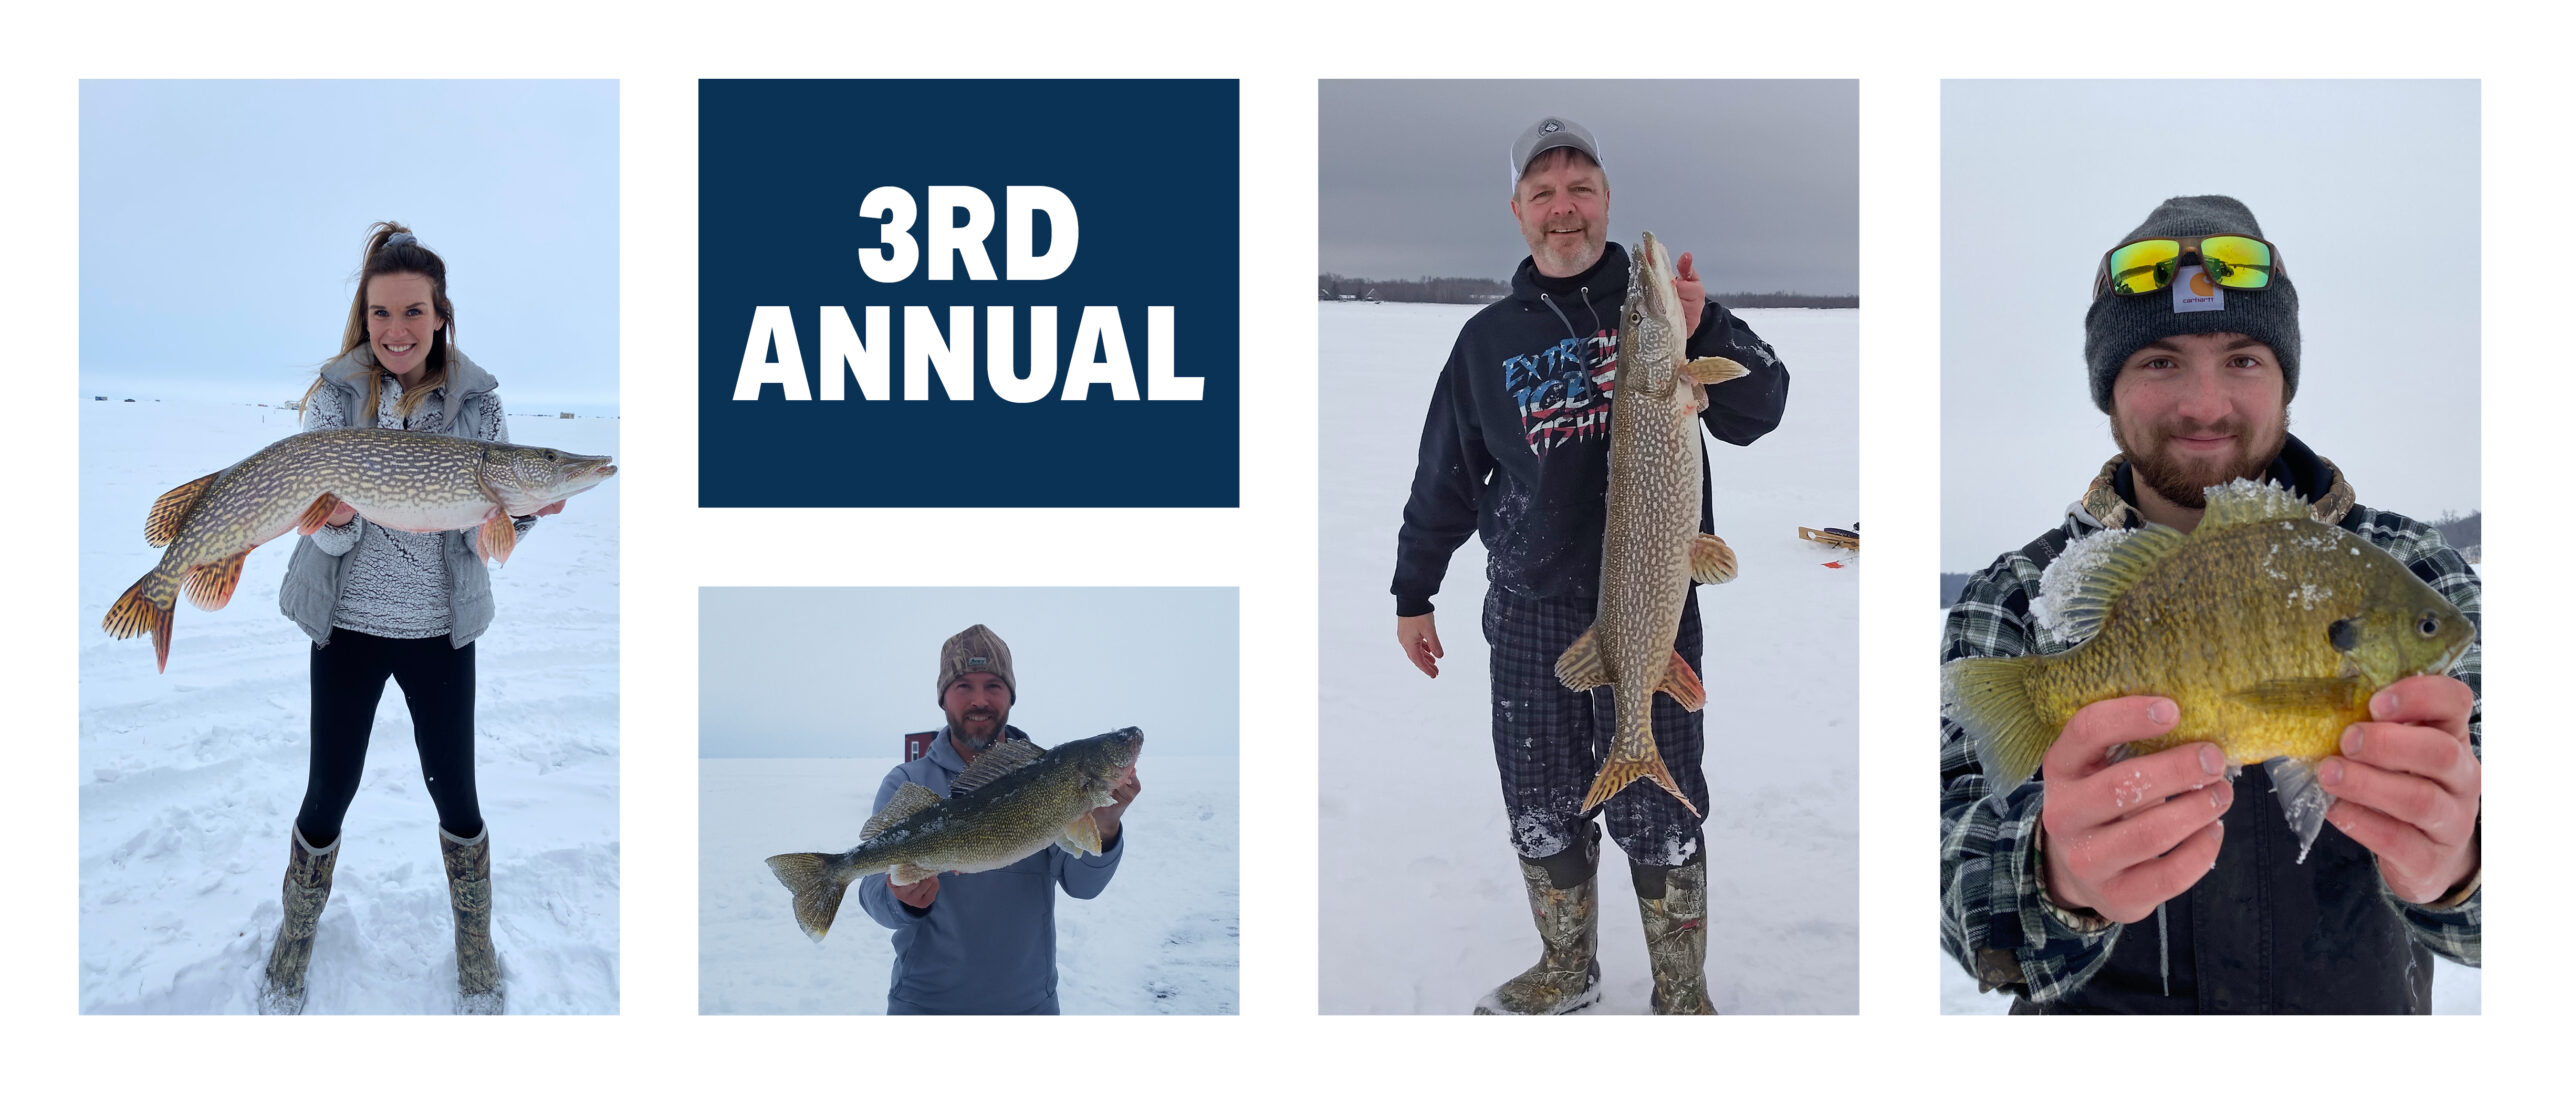 Americas Ice Fishing Tournament – Presented Virtually by the